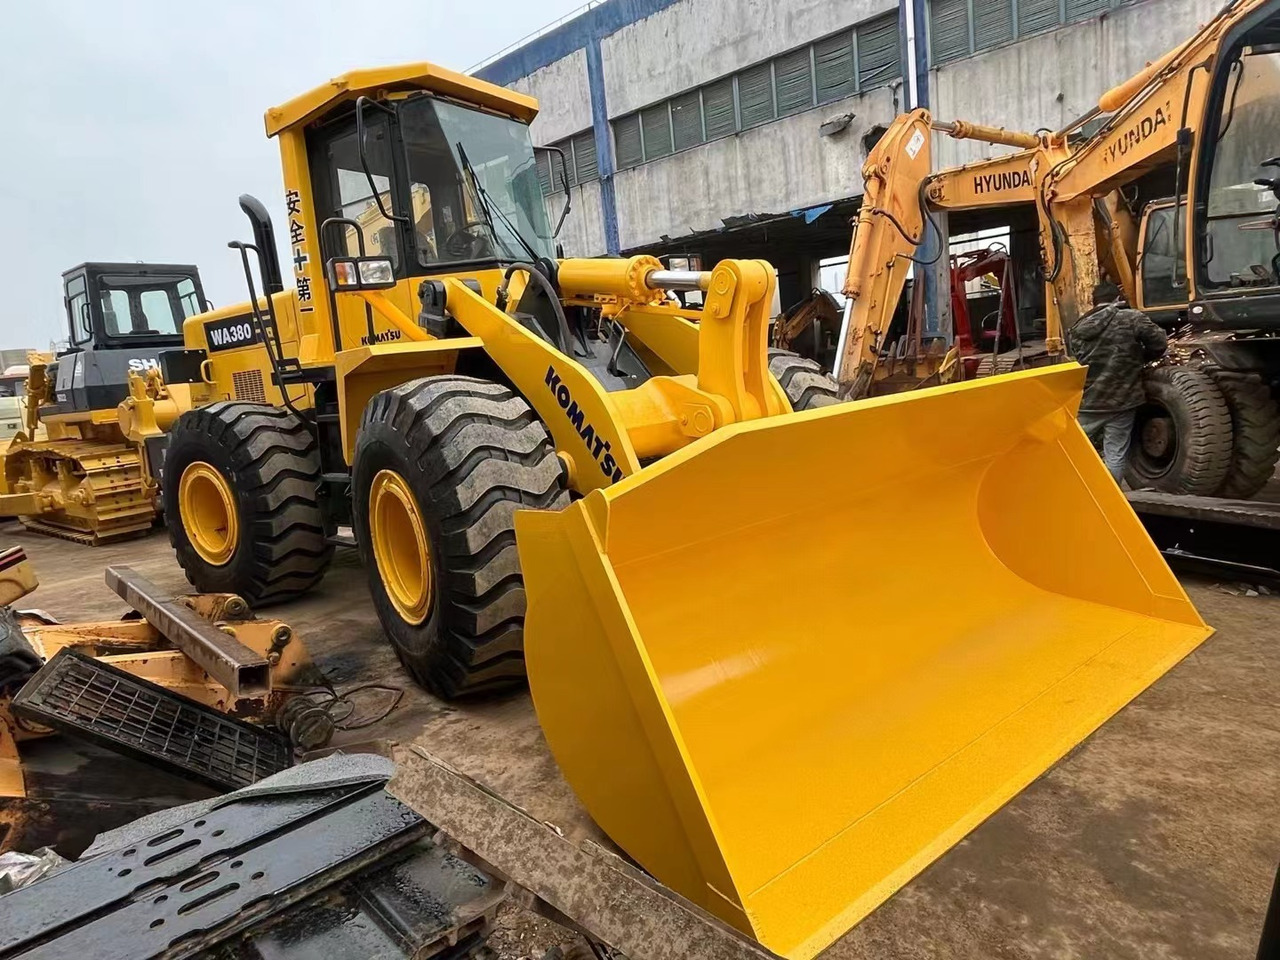 Wiellader KOMATSU WA380 small Used Loader  for sale with cheap price: afbeelding 7